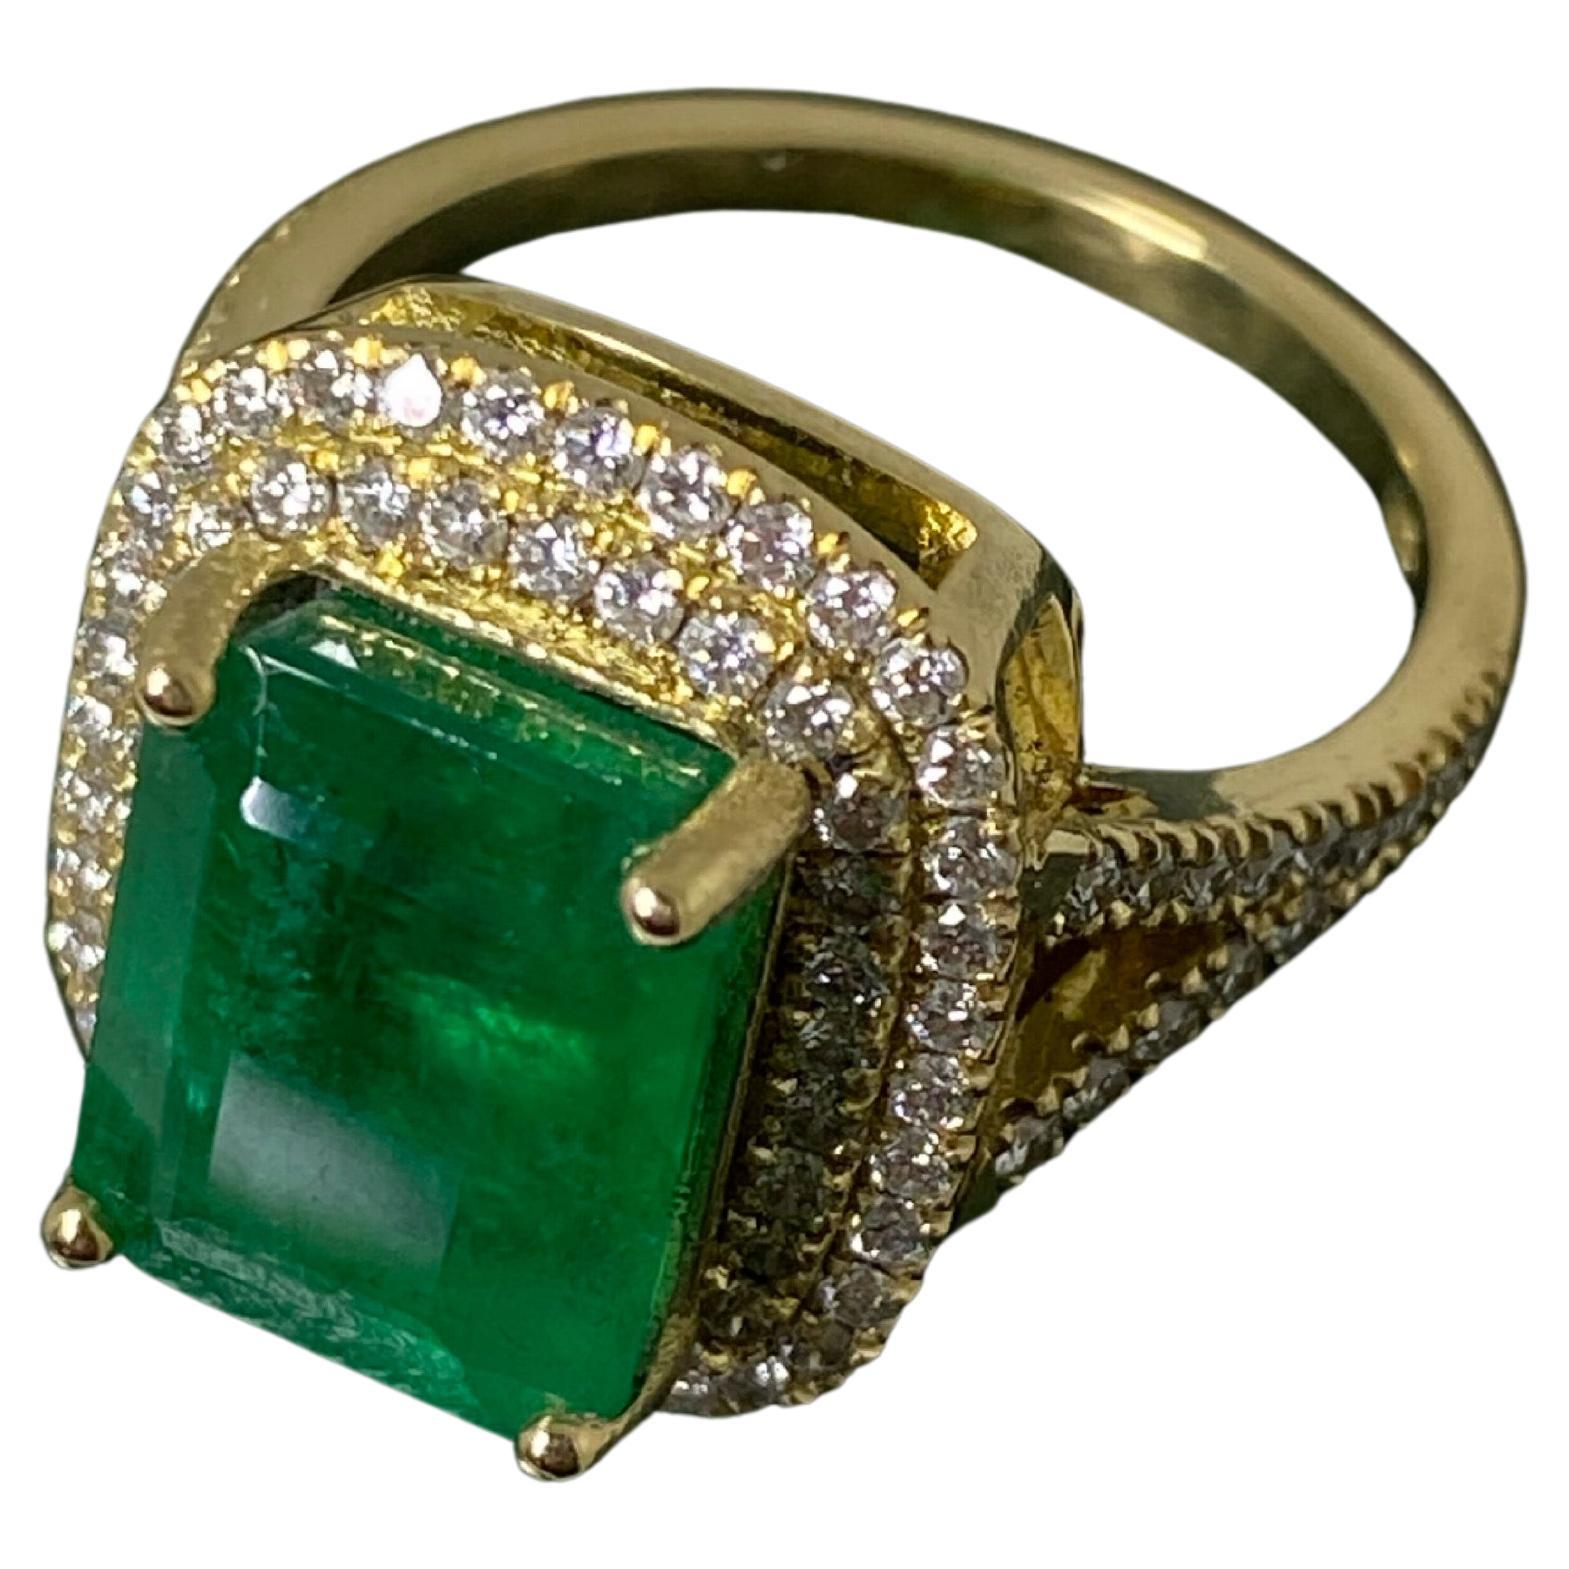 This vintage handmade piece of jewellery 
is featuring a superb Natural Emerald 
of rarely seen size - 5.05ct 
(11.15 x 8.58 x 6.51mm)
of Zambian origin & 
the most magnificent vivid intense 
grass green colour 
cut in its signature step (emerald)